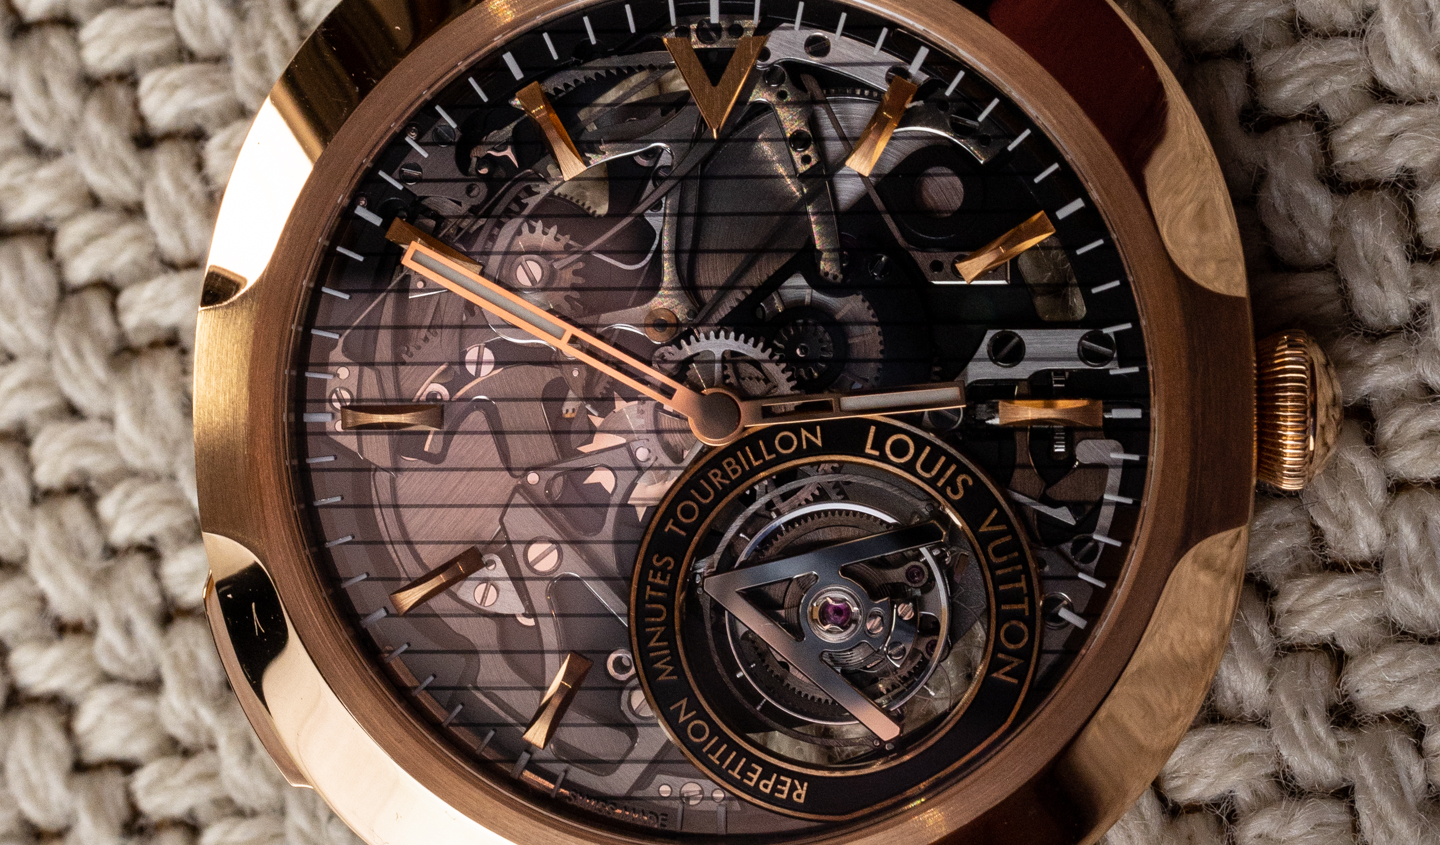 Hands-On: Louis Vuitton Voyager Minute Repeater Flying Tourbillon Watch